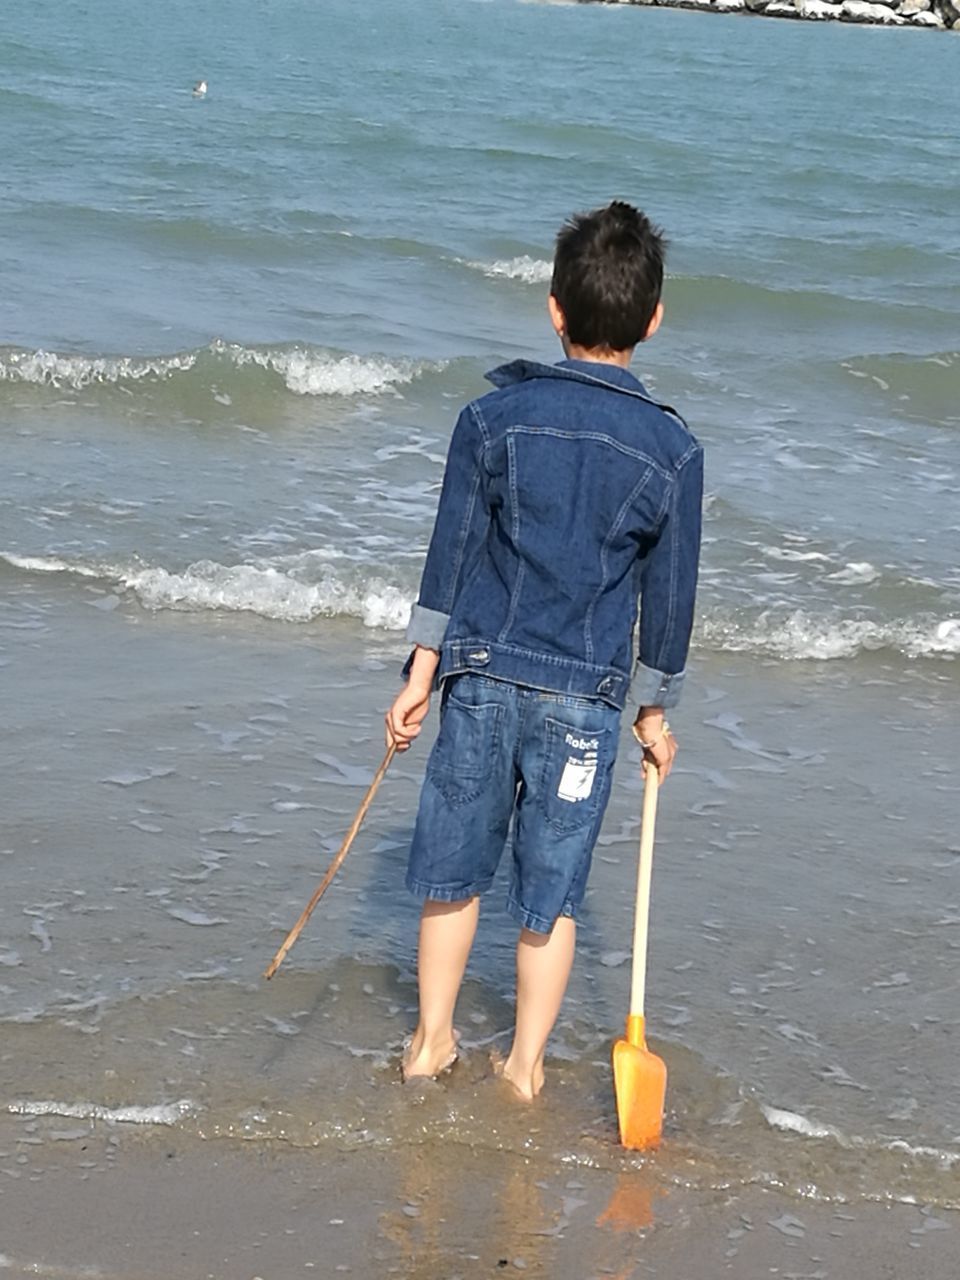 FULL LENGTH REAR VIEW OF A MAN STANDING AT BEACH